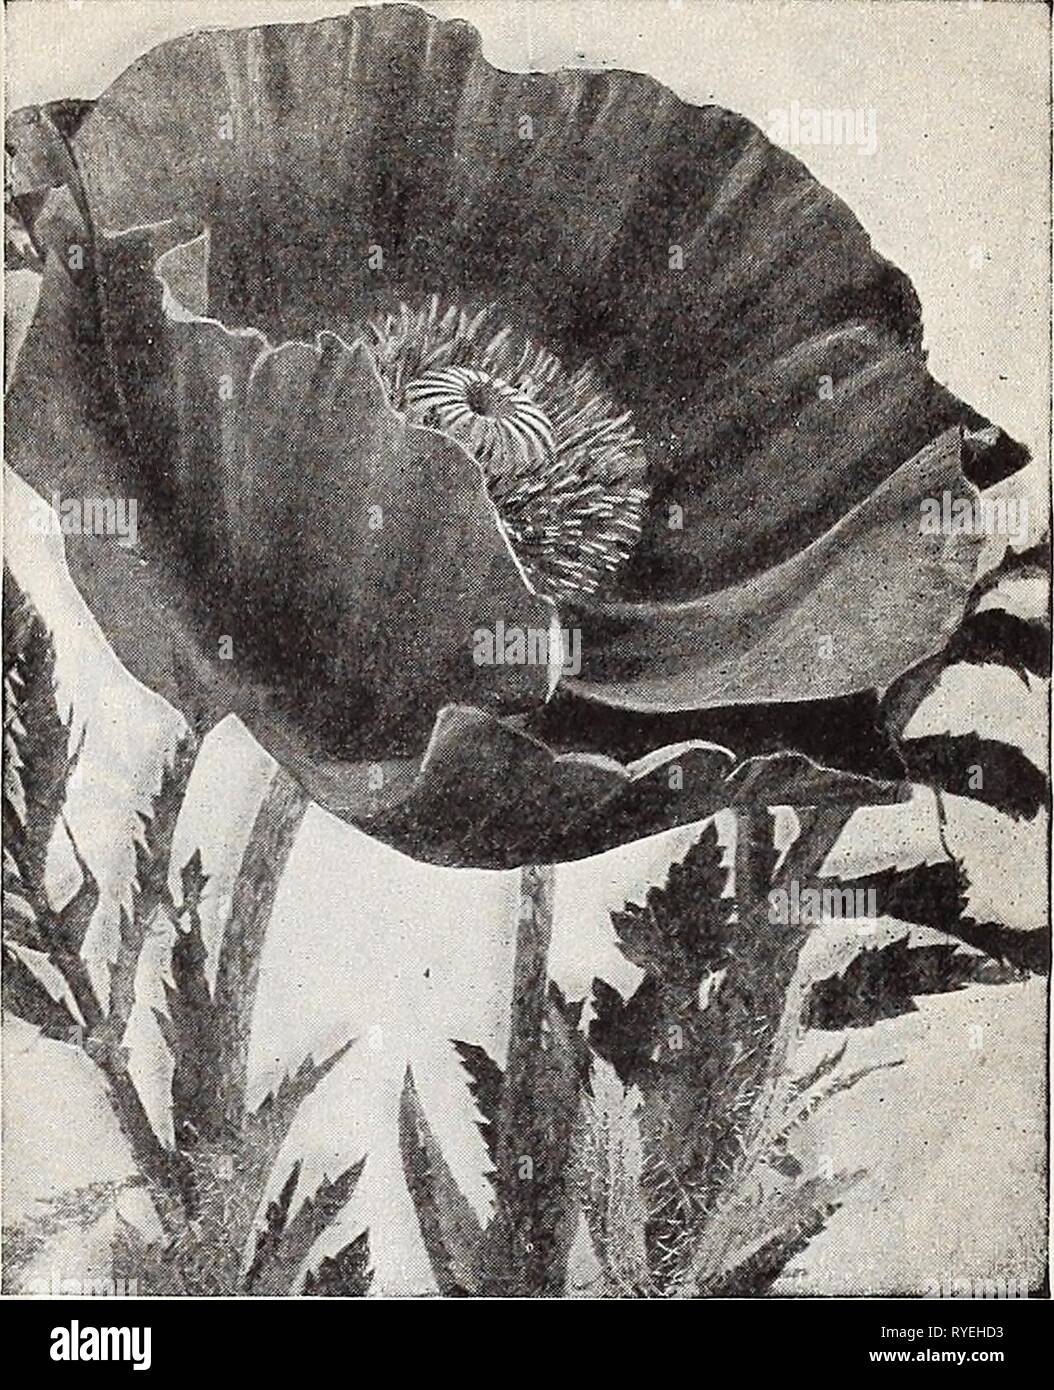 Dreer's wholesale price list for florists : flower seeds lawn grass seeds bulbs plants sundries  dreerswholesalep1932henr 0 Year: 1932  HENRY A. DREER Flower Seeds WHOLESALE LIST 15 Lilium Regale. This wonderful lily is easily grown from seed, flowering the second season. Trade pkt., 25 eta.; 1 oz„ $1.0O; Vi lb., $3.00; 1 lb., $10.00. Philippinense Formosanum. A truly remarkable lily with umbels of large white long trumpet shaped flow- ers, like an Easter Lily. Will bloom in 6 to 8 months from the time seeds are sown; very fragrant. 2 to 3 feet. Trade pkt., 50 cts.;  oz., $1.50; 1 oz., $5.00.  Stock Photo